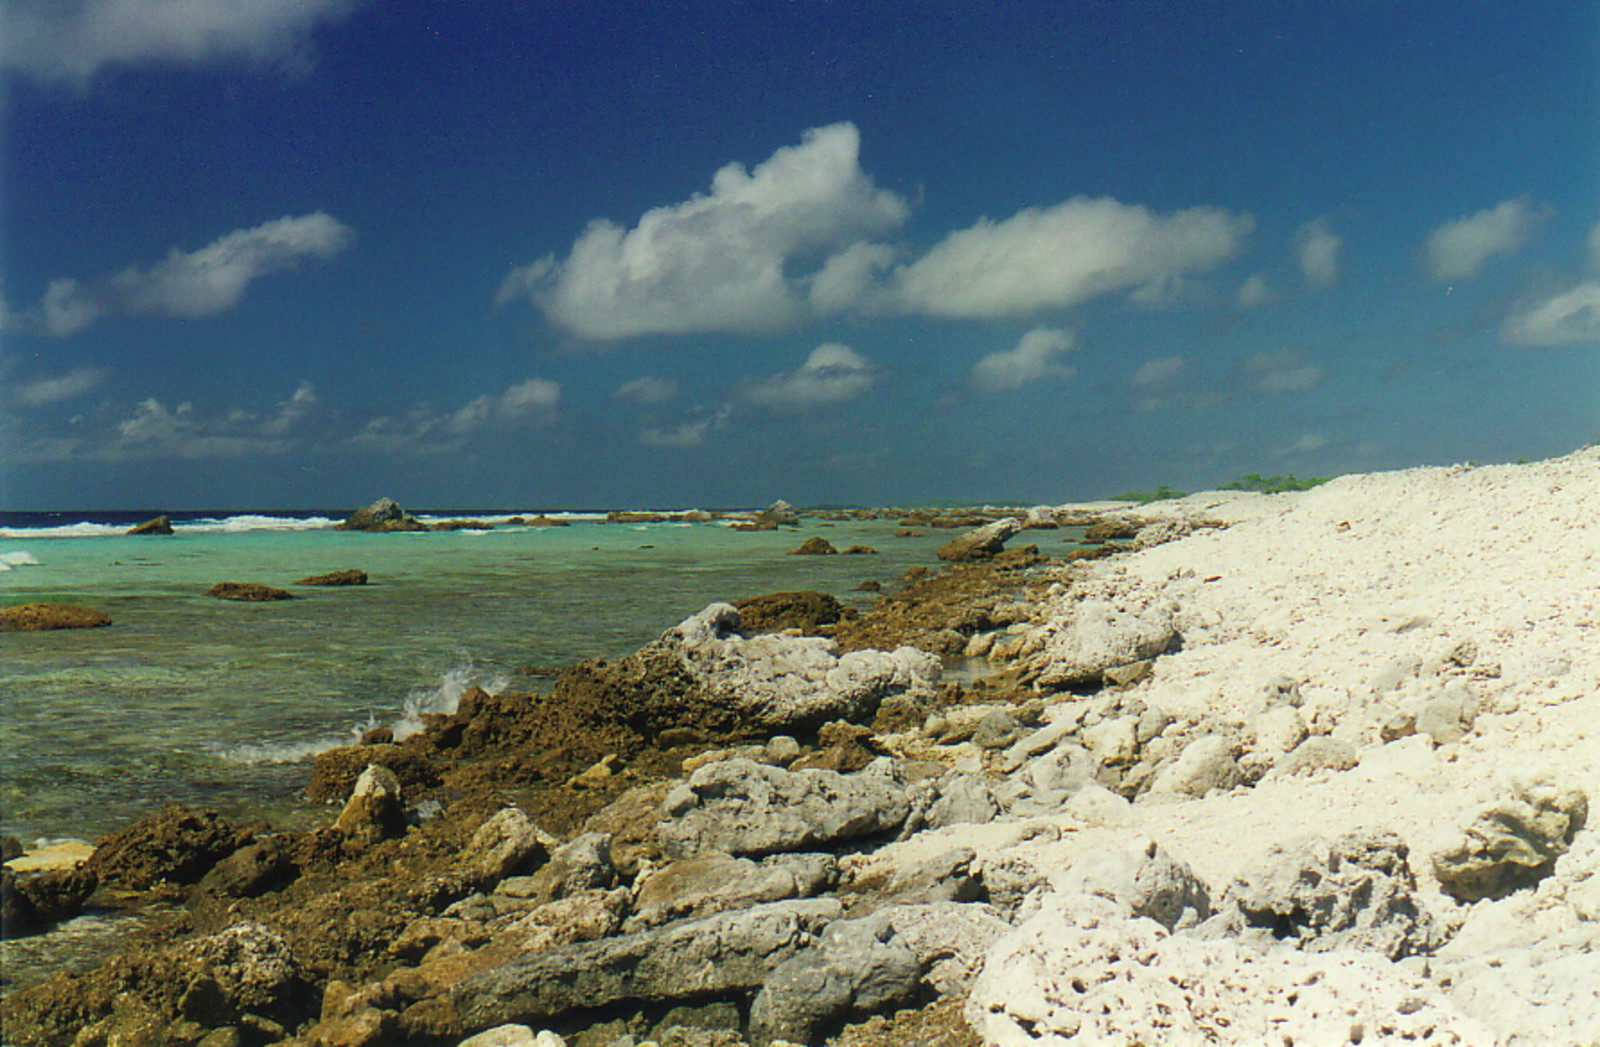 The outside of Makemo atoll